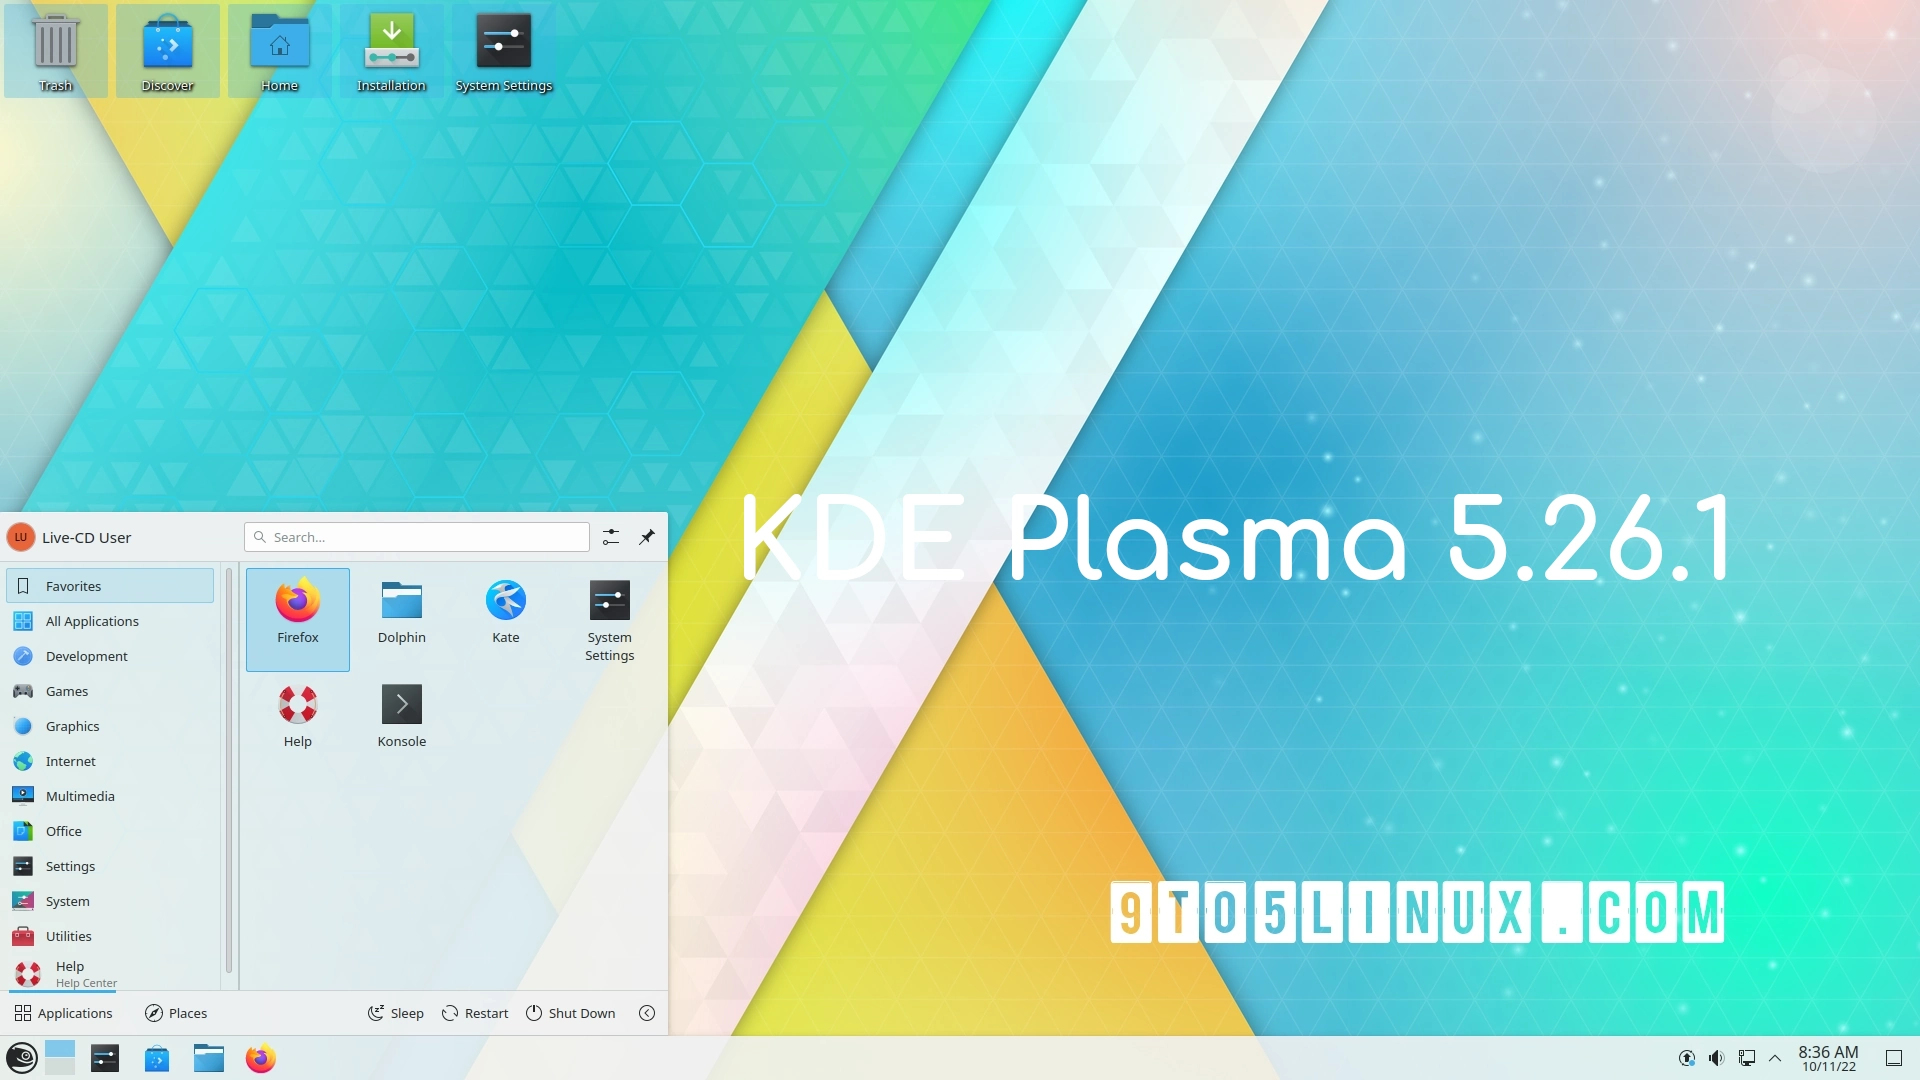 KDE Plasma 5.26.1 Finally Fixes the Infamous “Korners” Bug, Other Issues